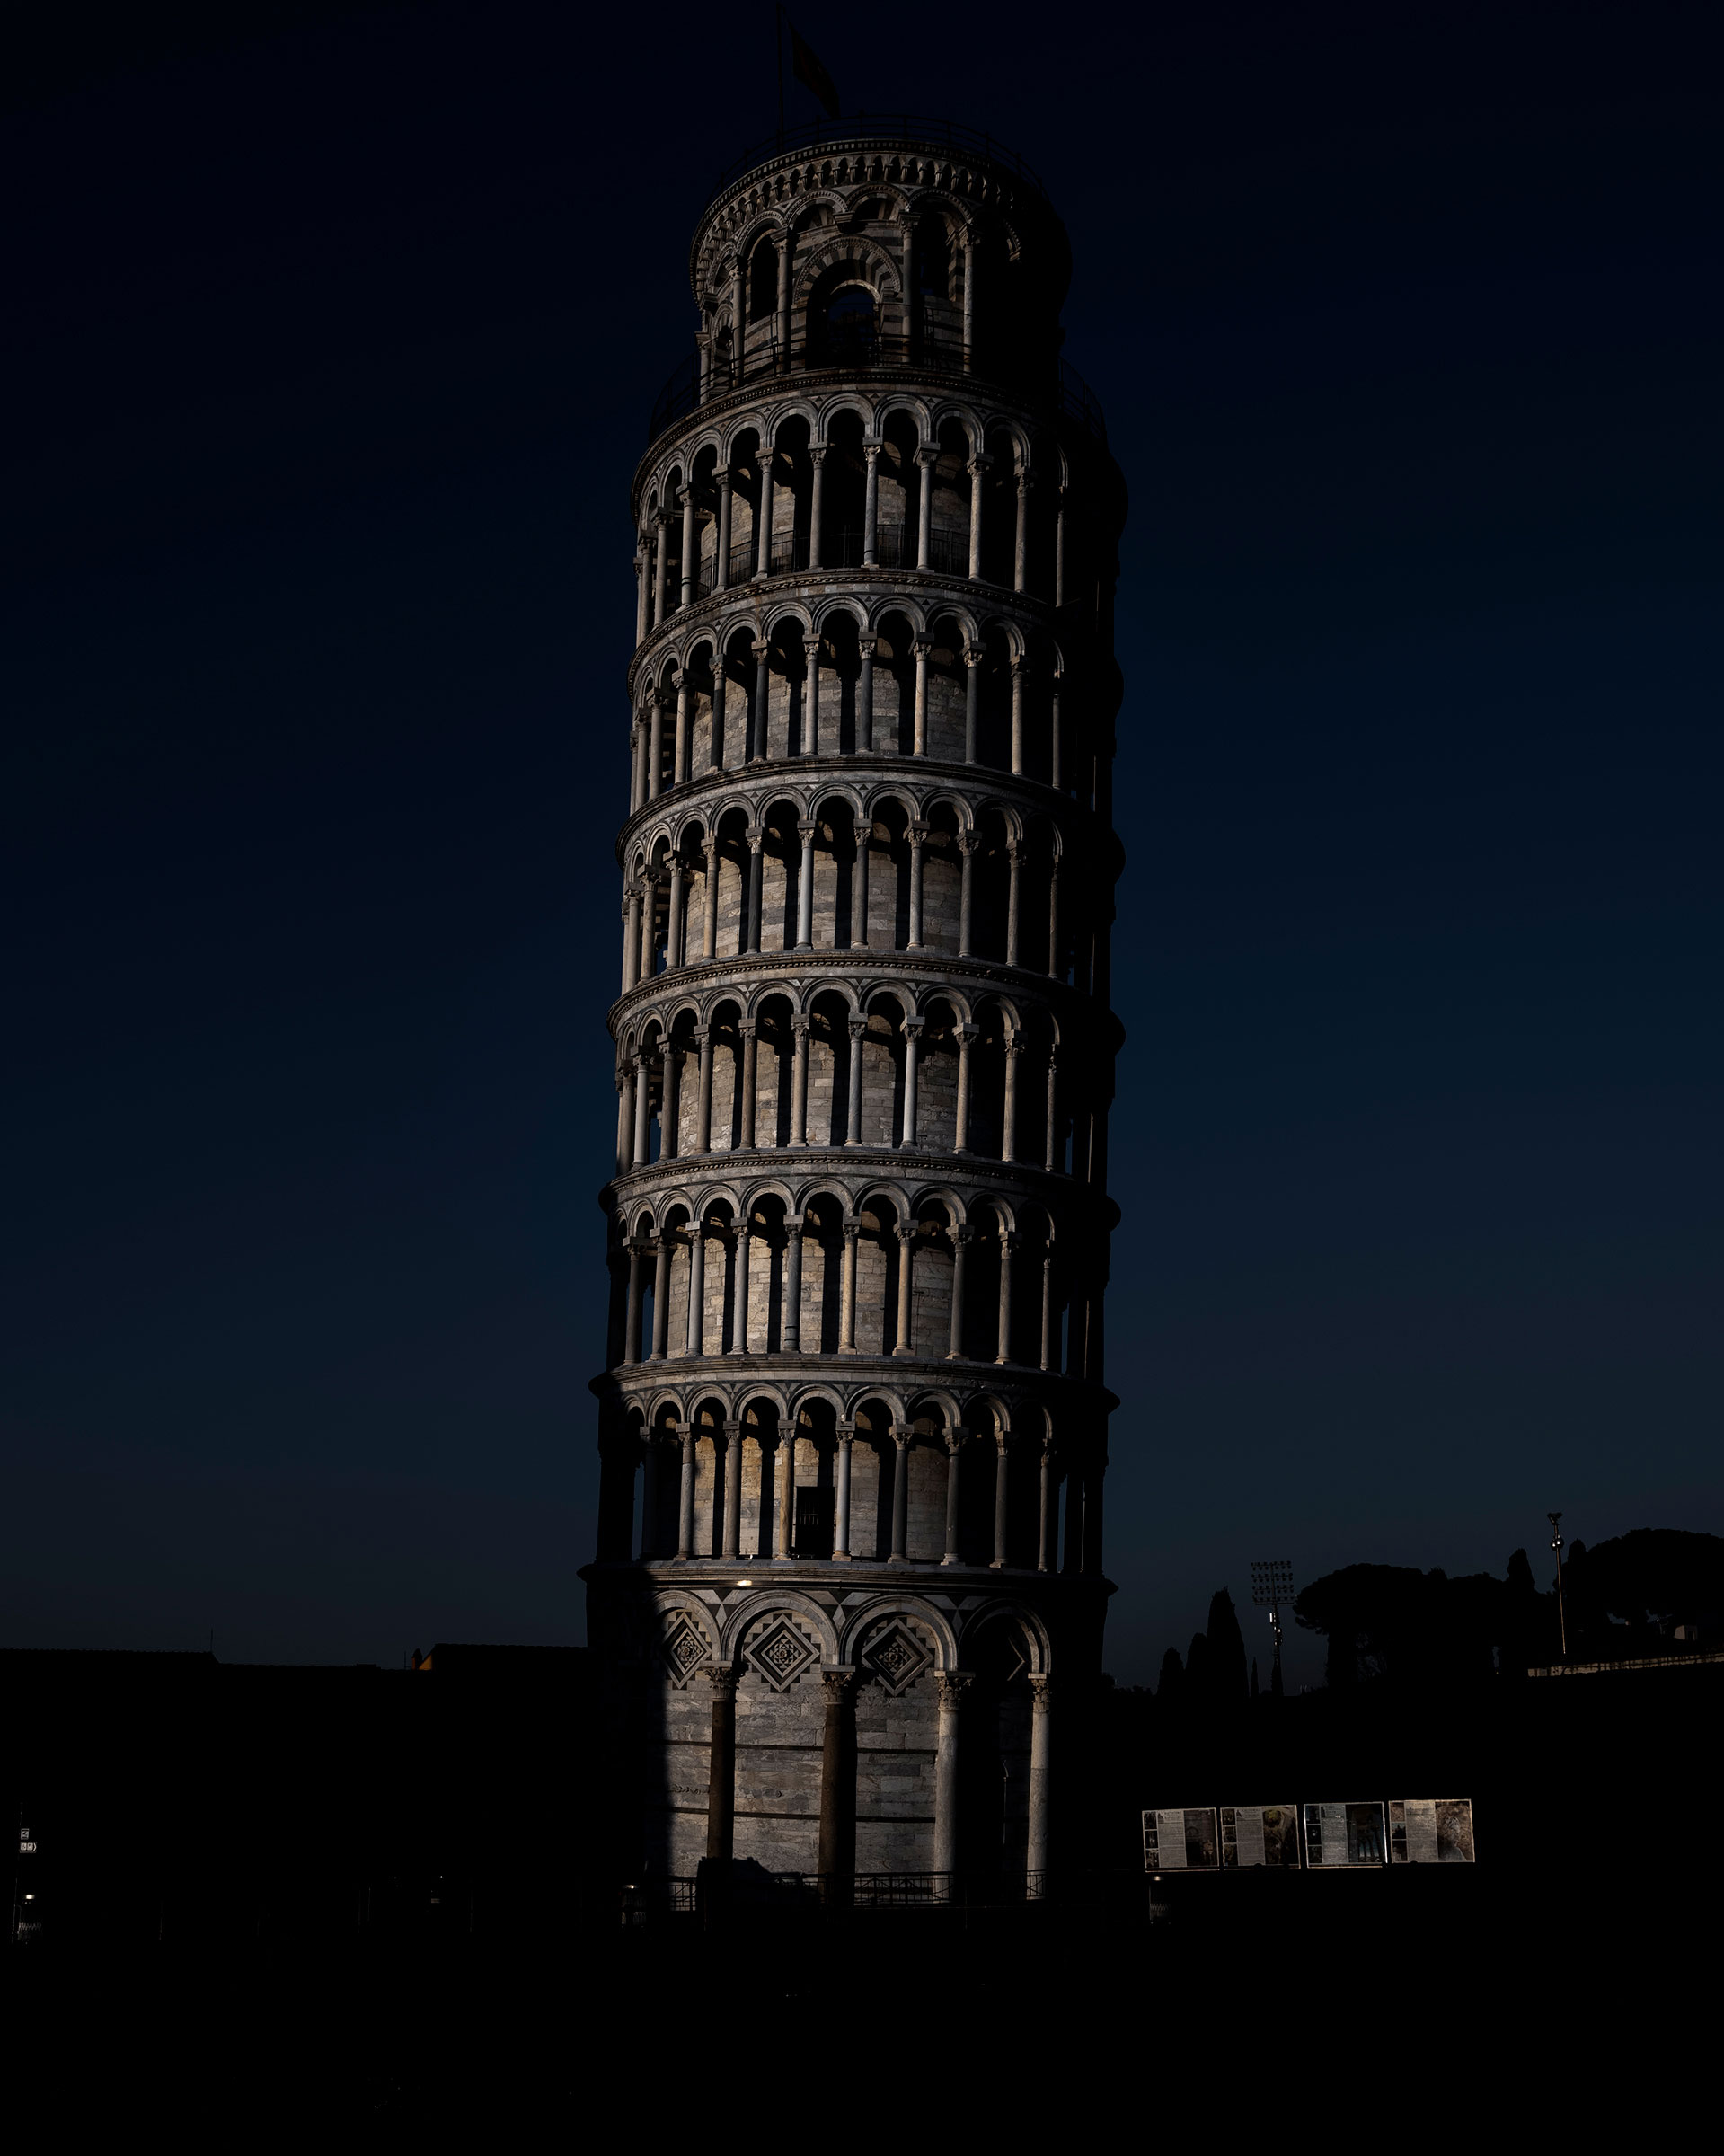 The Tower of Pisa in March. Tourist attractions had closed across Italy due to the pandemic.